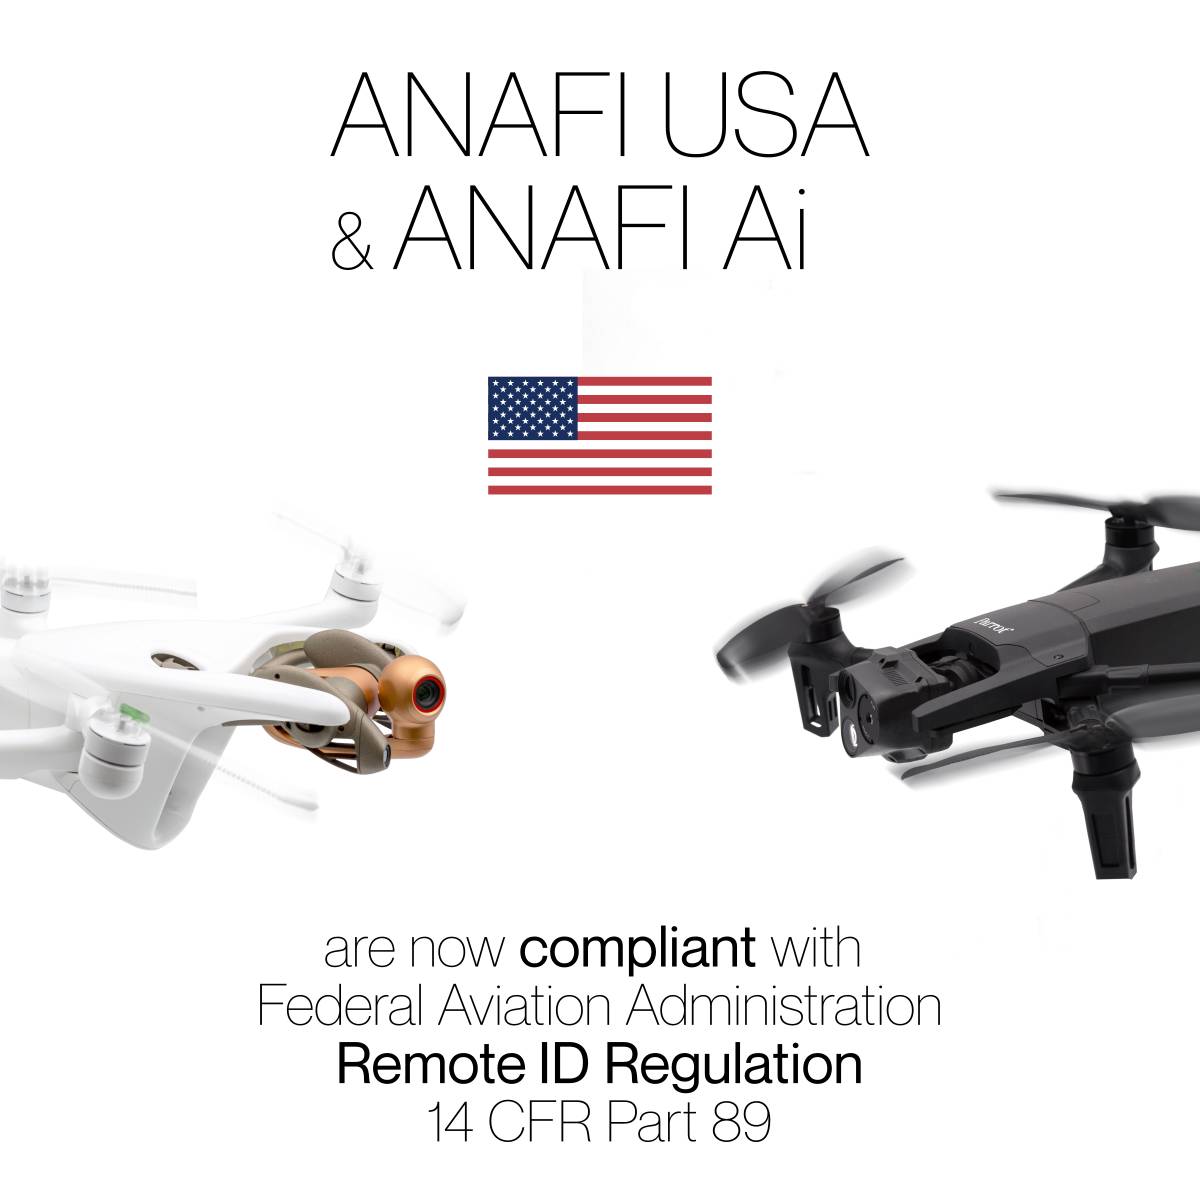 In accordance to the new FAA Remote Identification (remote ID) requirements, the ANAFI USA and the ANAFI Ai are now fully compliant, thanks to an update to firmware + FreeFlight 6 & 7. #faa #anafiusa #anafiai #freeflight #remoteID #astm #safety #security